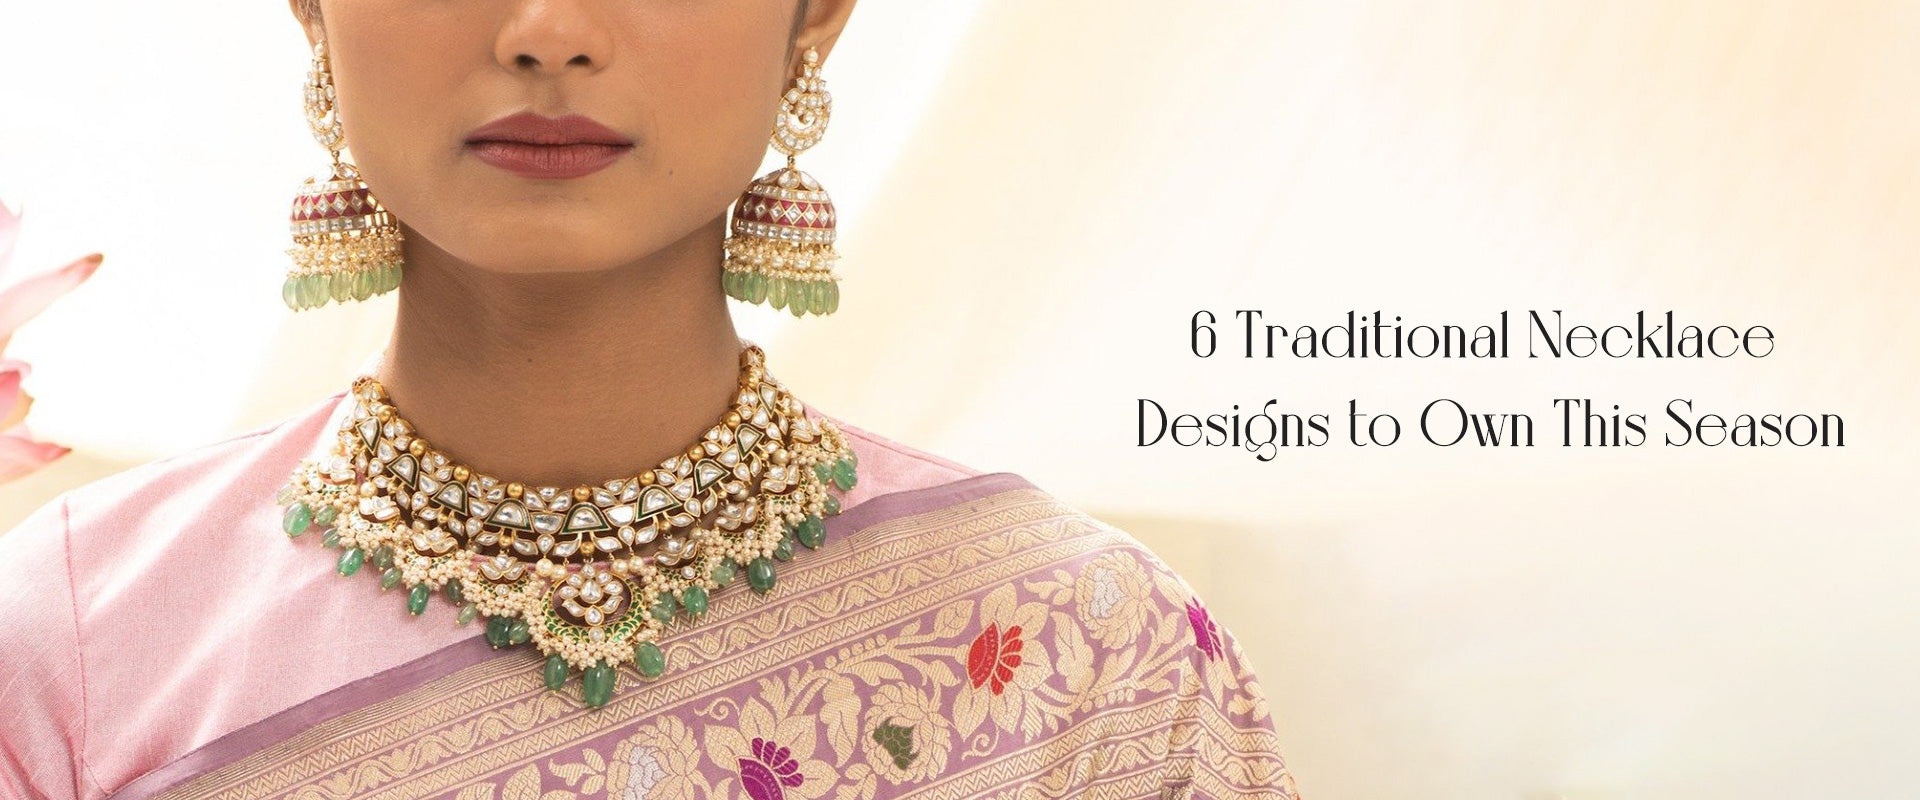 6 Traditional Necklace Designs to Own This Season